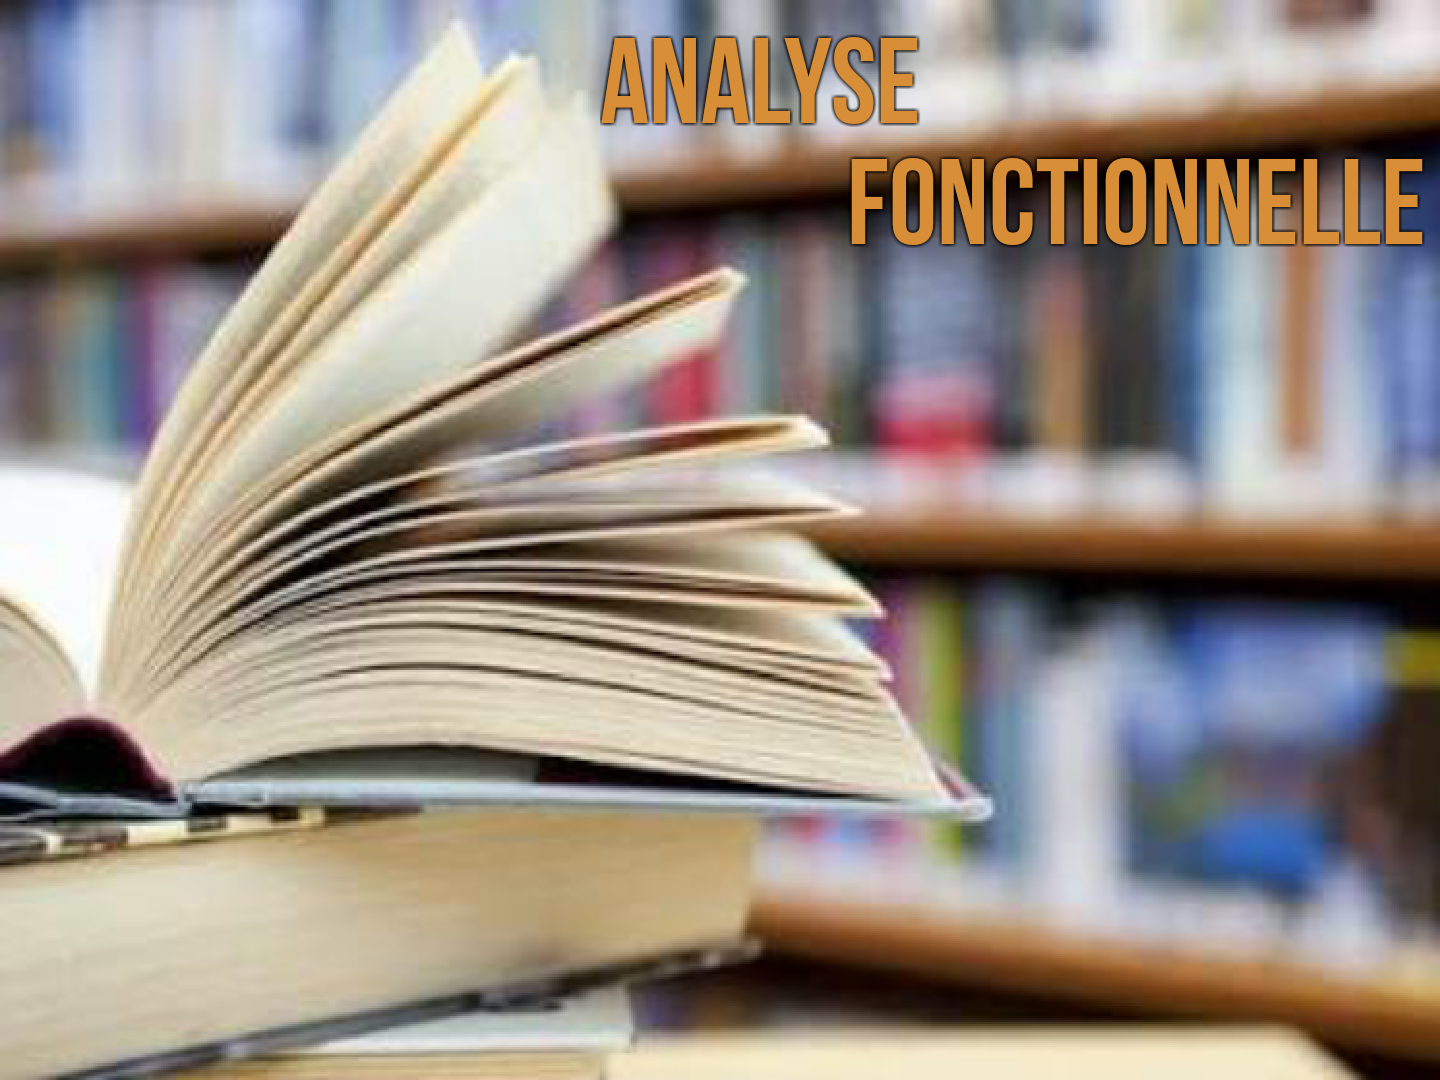 Analyse fonctionelle